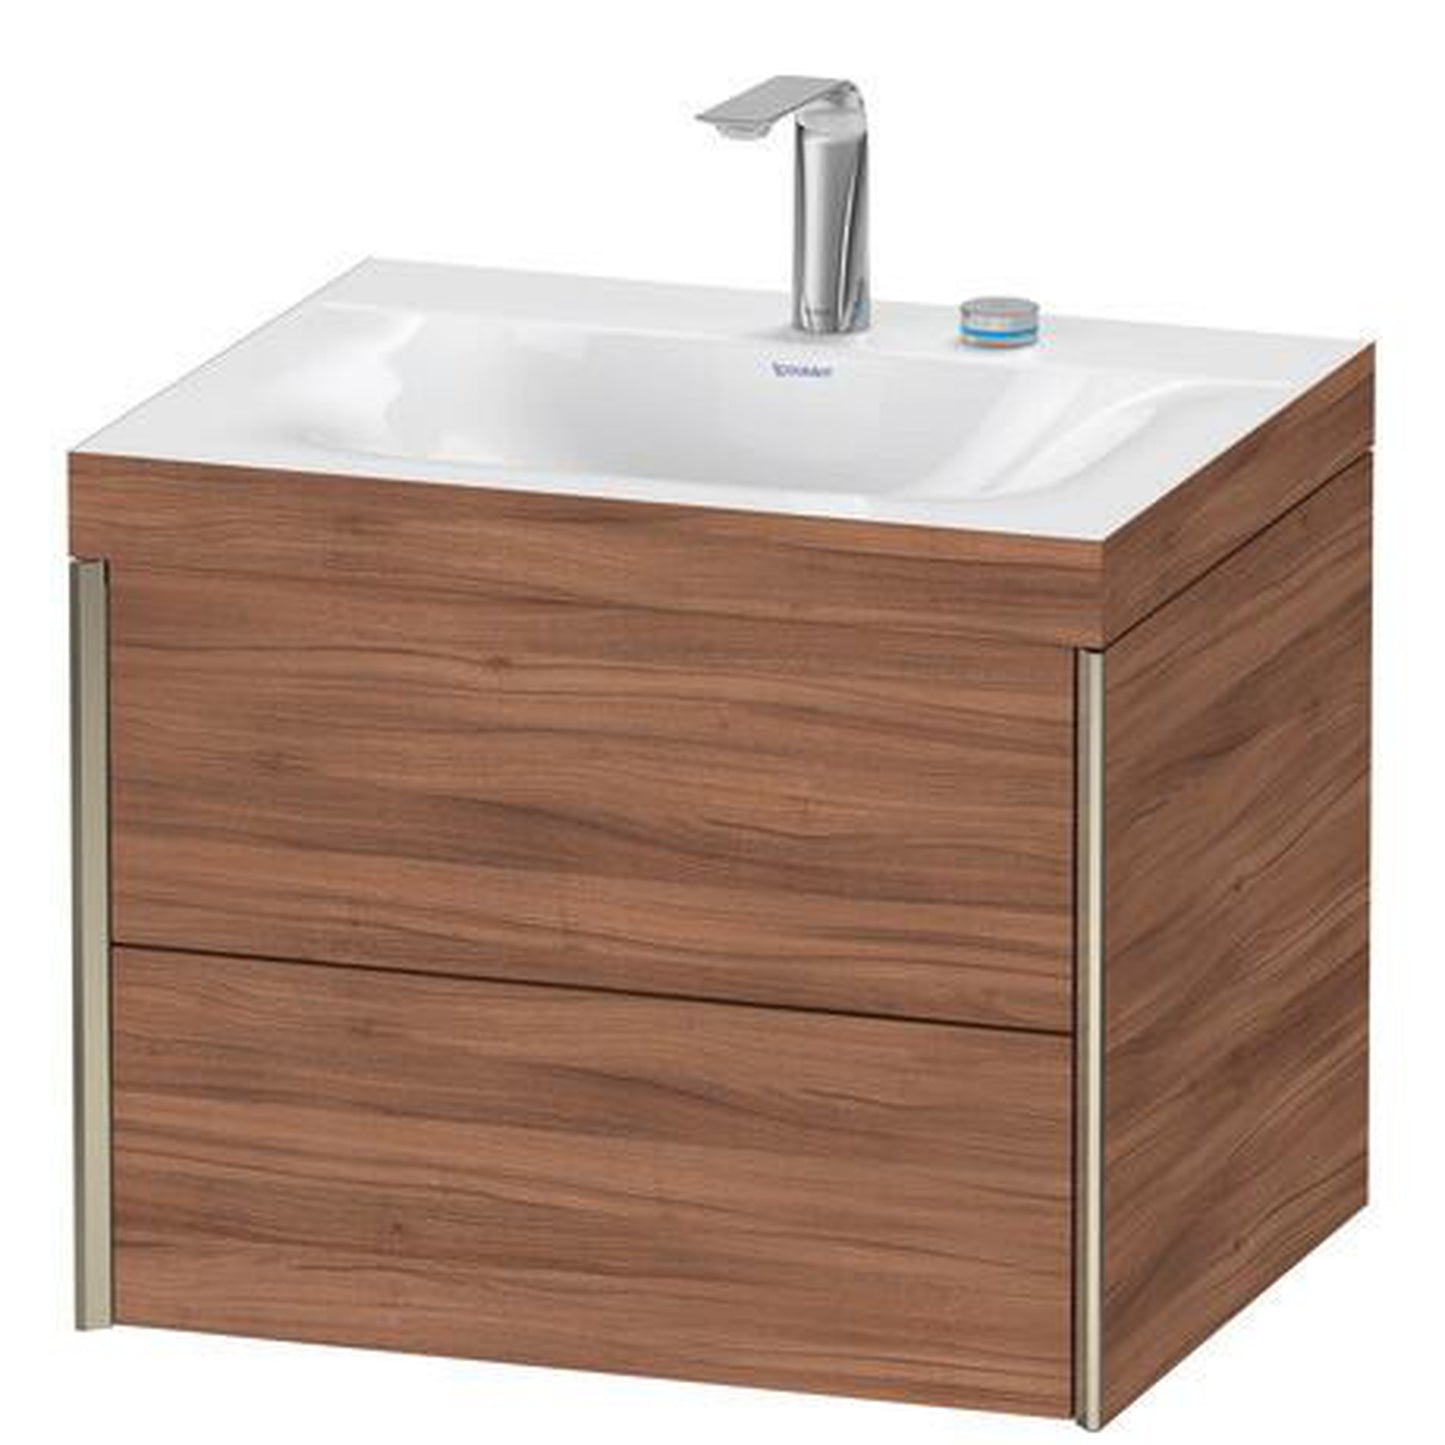 Duravit Xviu 24" x 20" x 19" Two Drawer C-Bonded Wall-Mount Vanity Kit With Two Tap Holes, Walnut (XV4614EB179C)